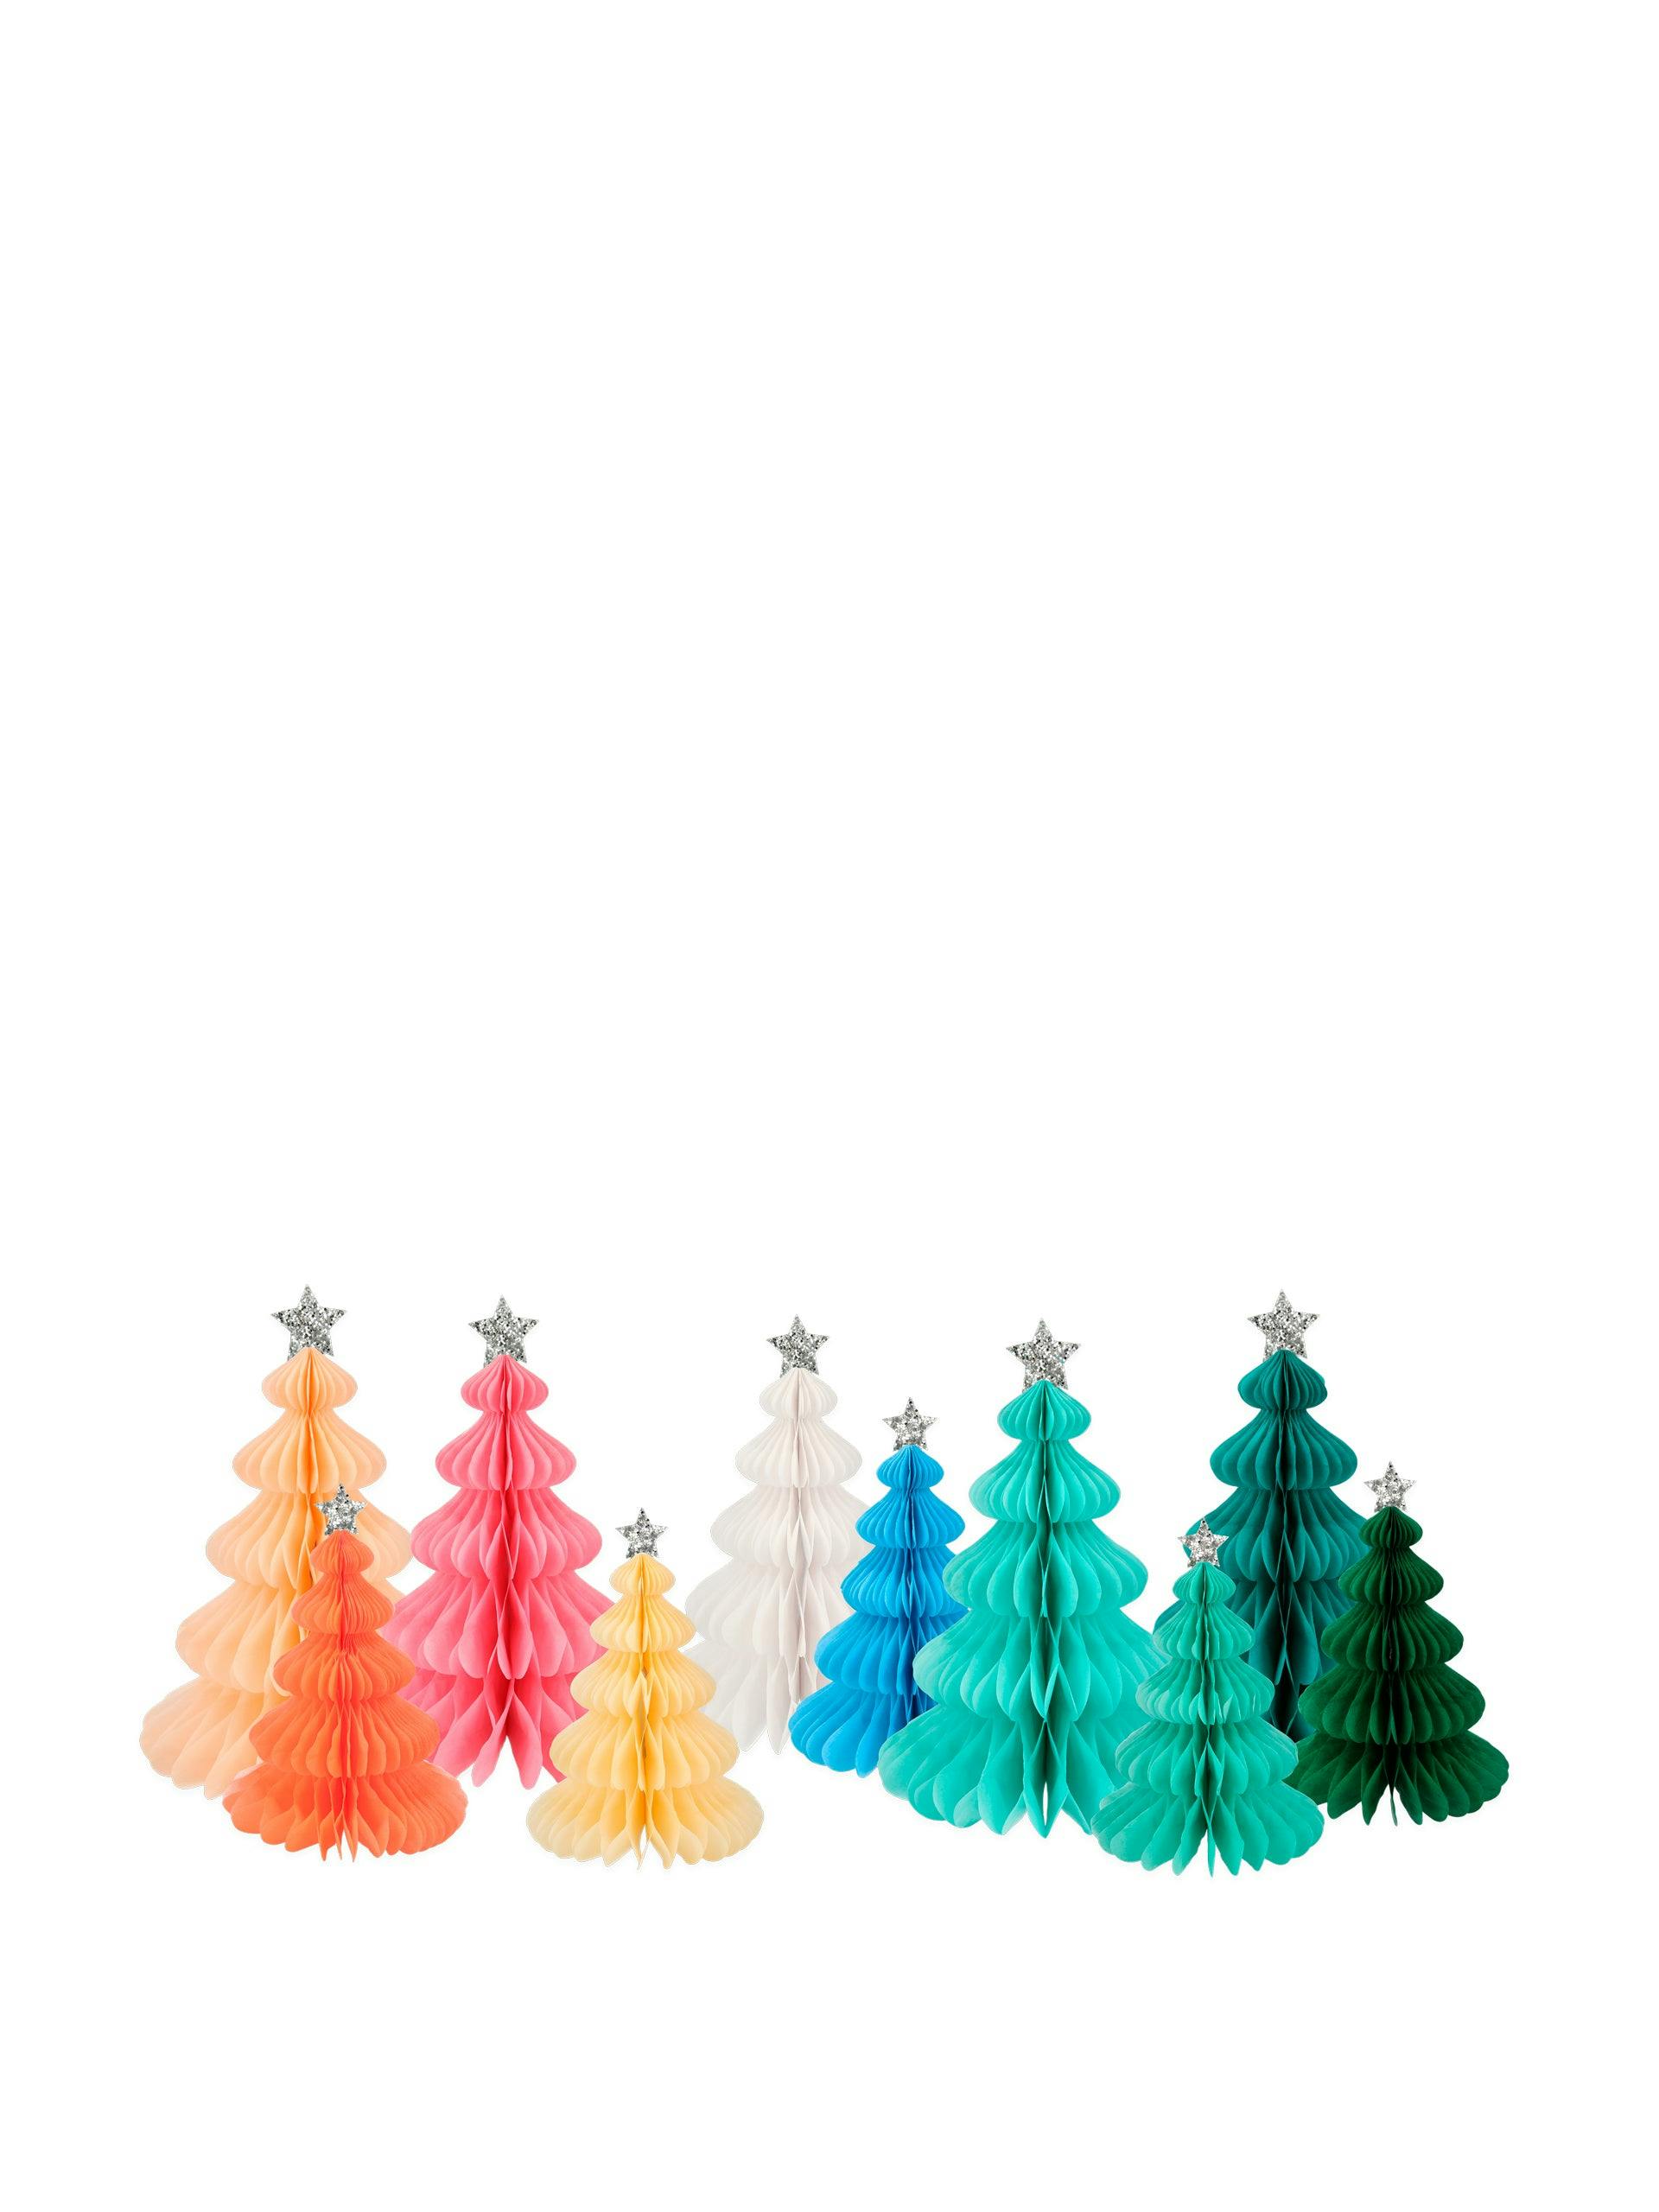 Rainbow forest decorations